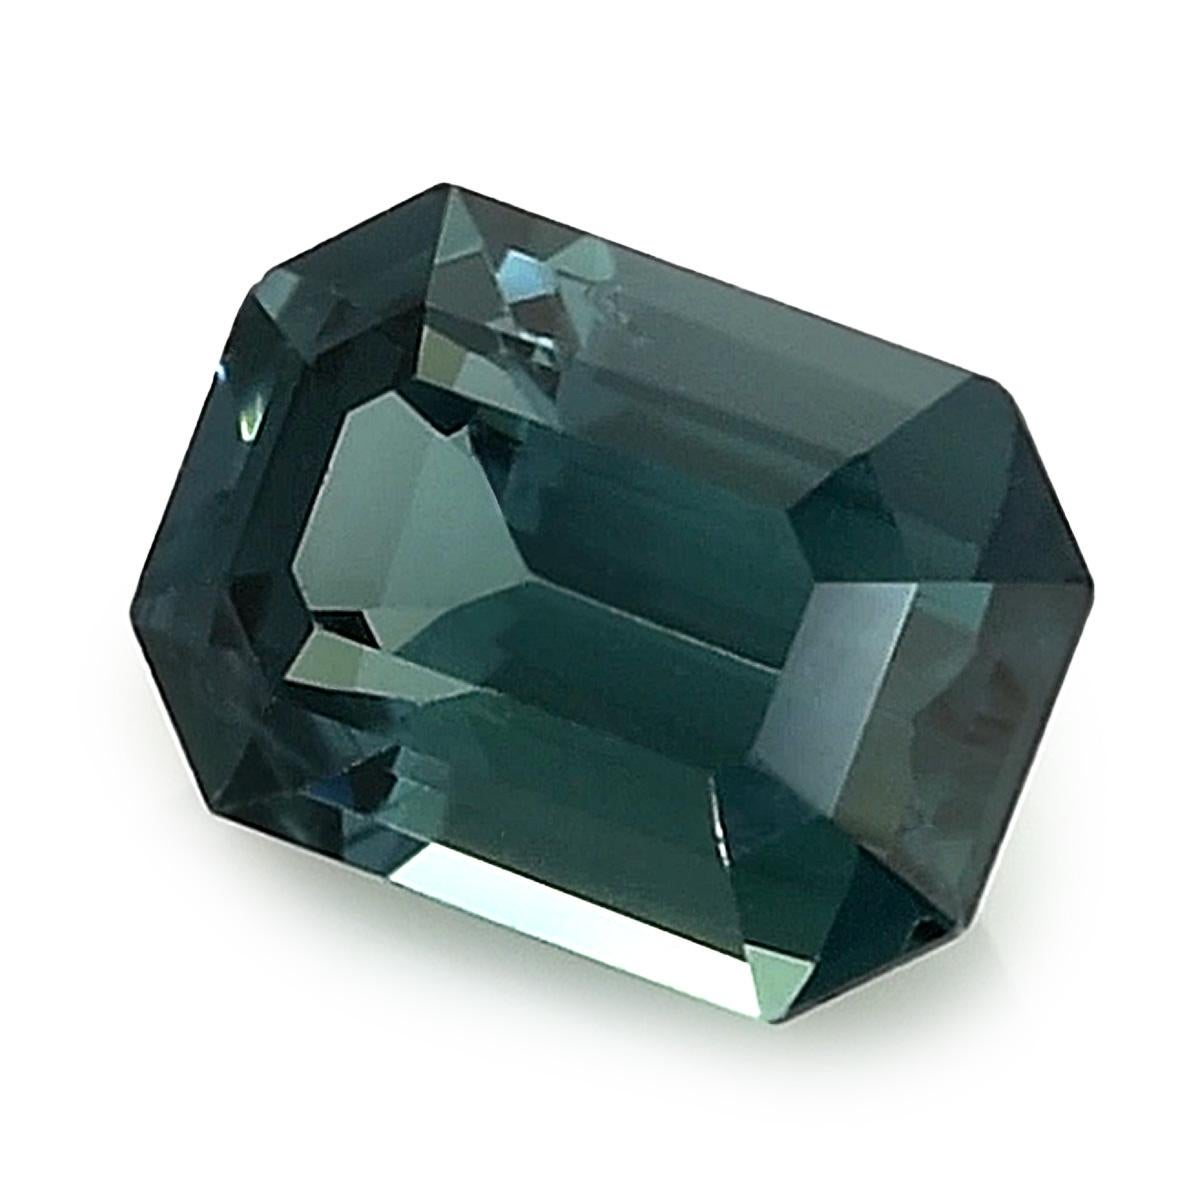 Presenting a Natural Green Blue Sapphire, distinguished by its 1.15-carat weight. This enchanting gem assumes an Octagonal shape with precise measurements of 6.89 x 4.86 x 3.60 mm. Its brilliance is accentuated by the Brilliant/Step cut, revealing a